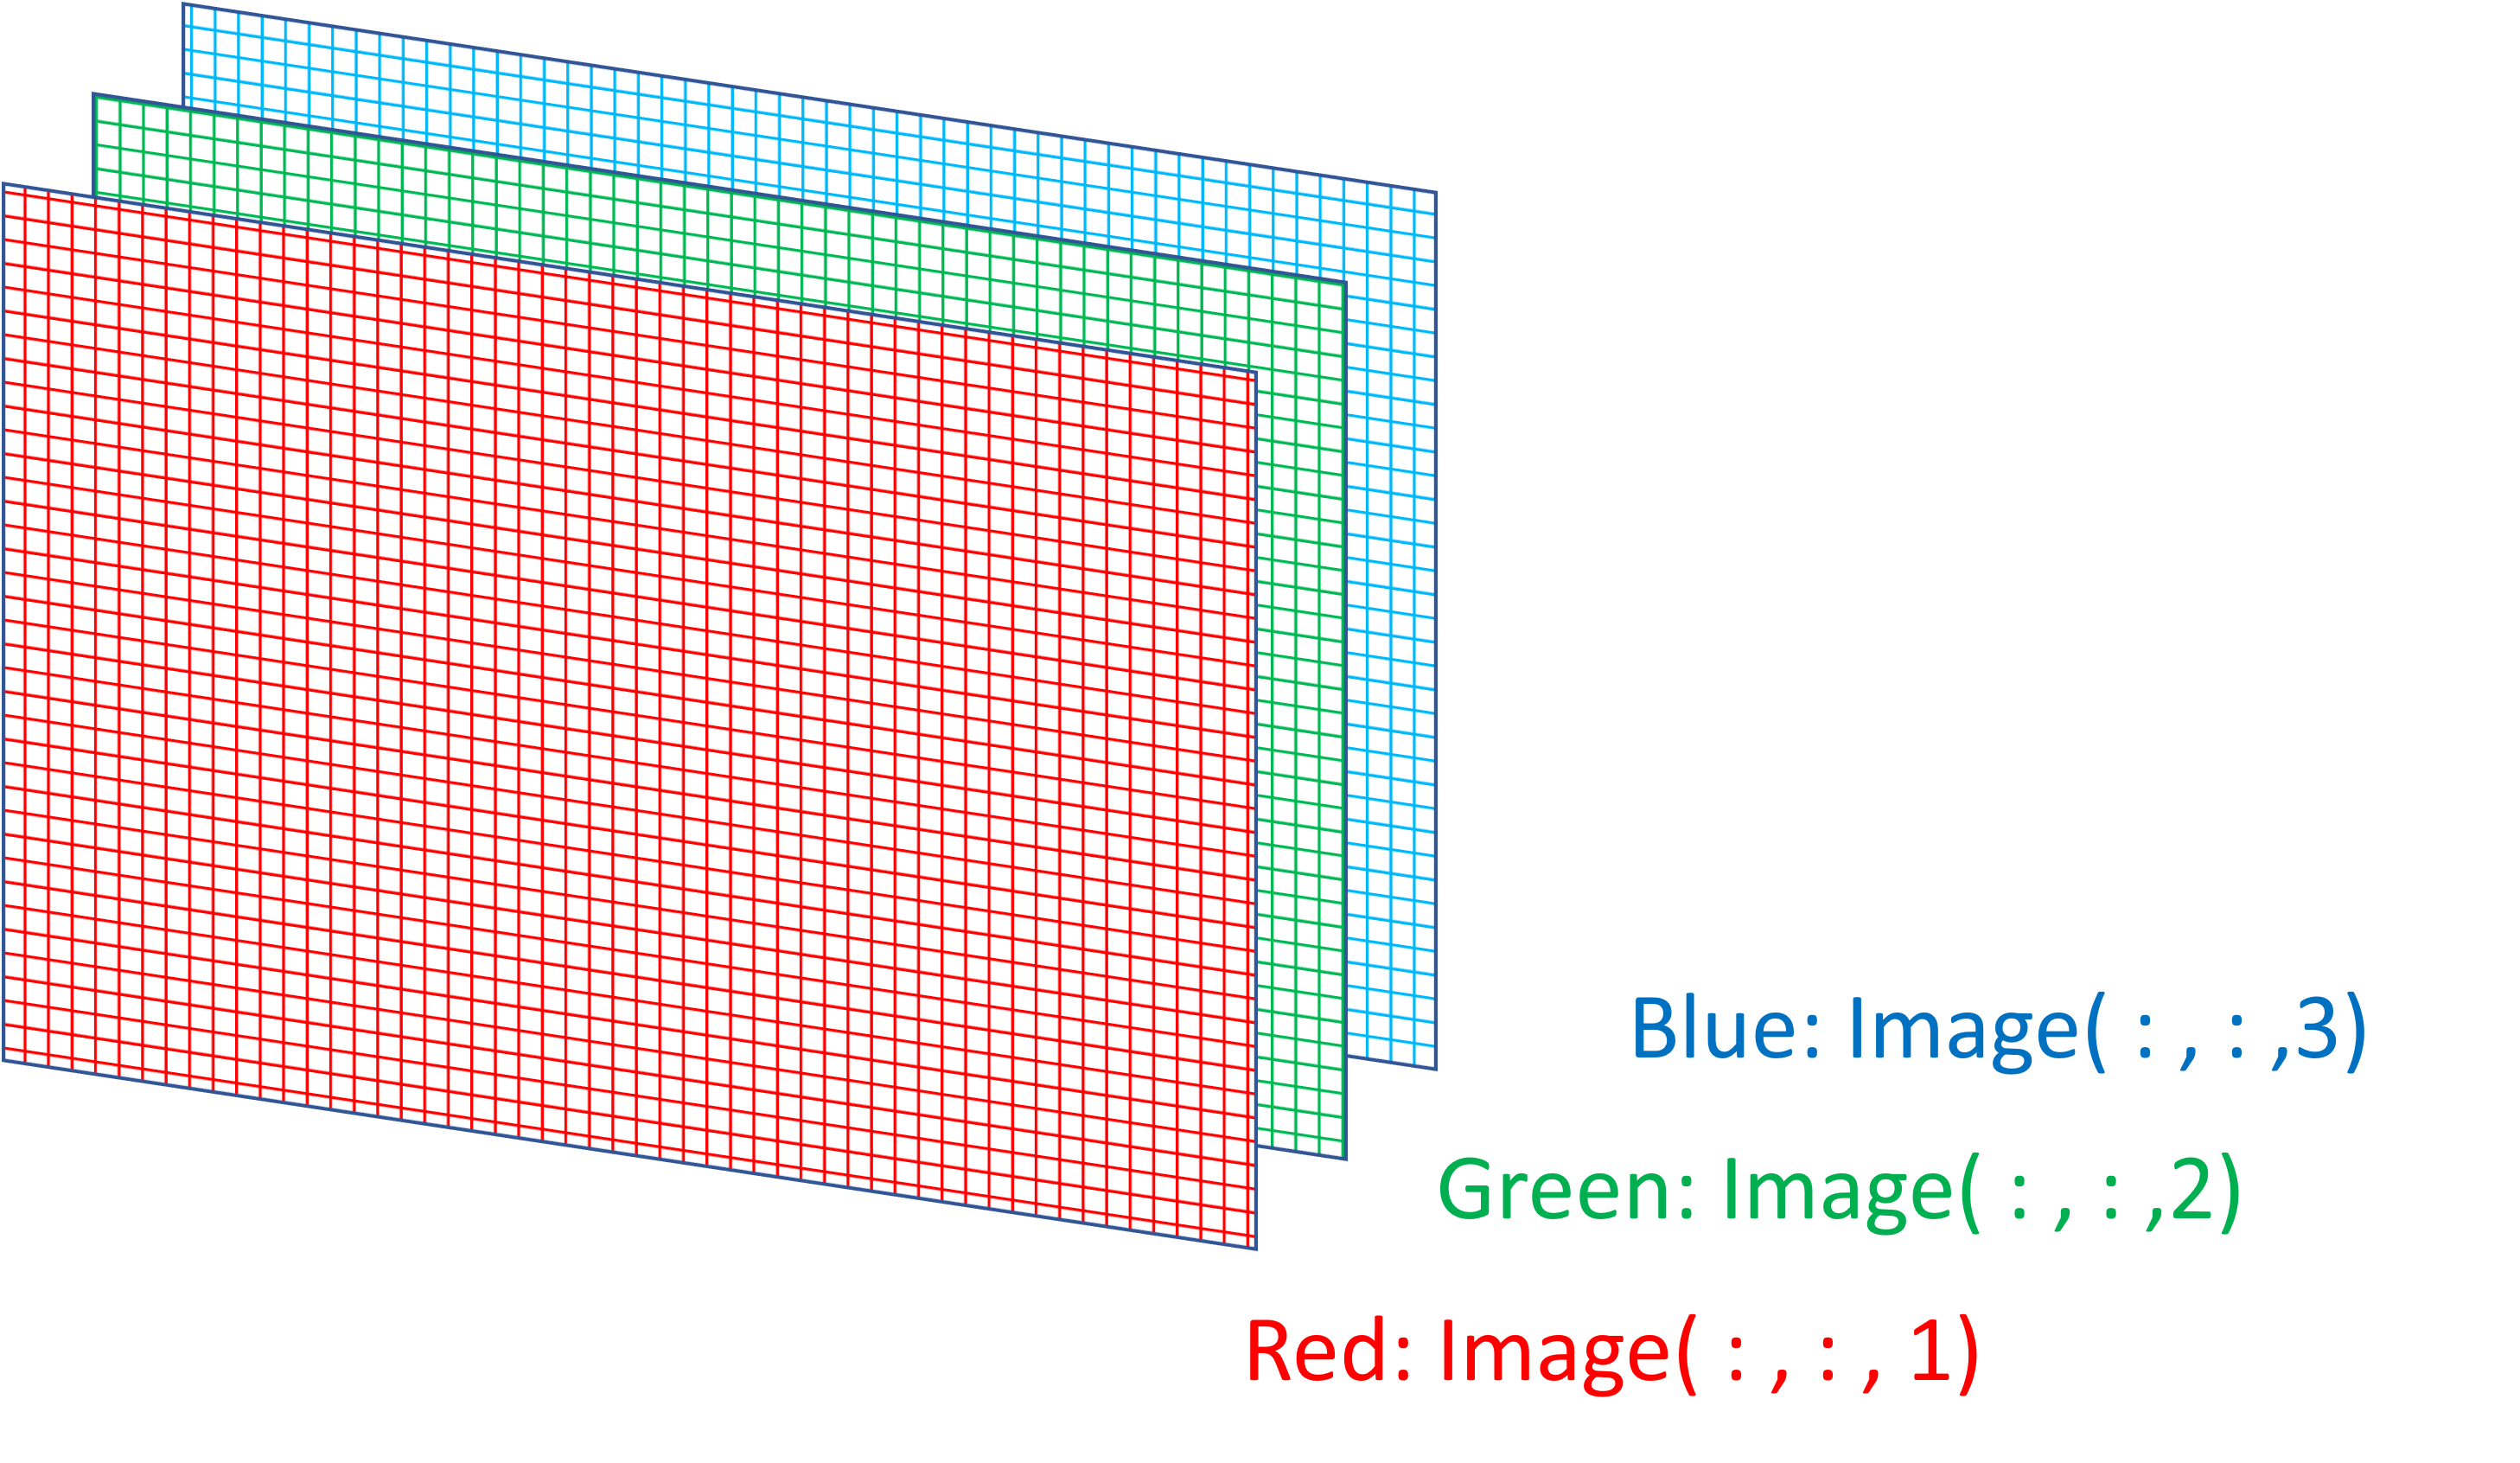 Images as multi-dimensional arrays.